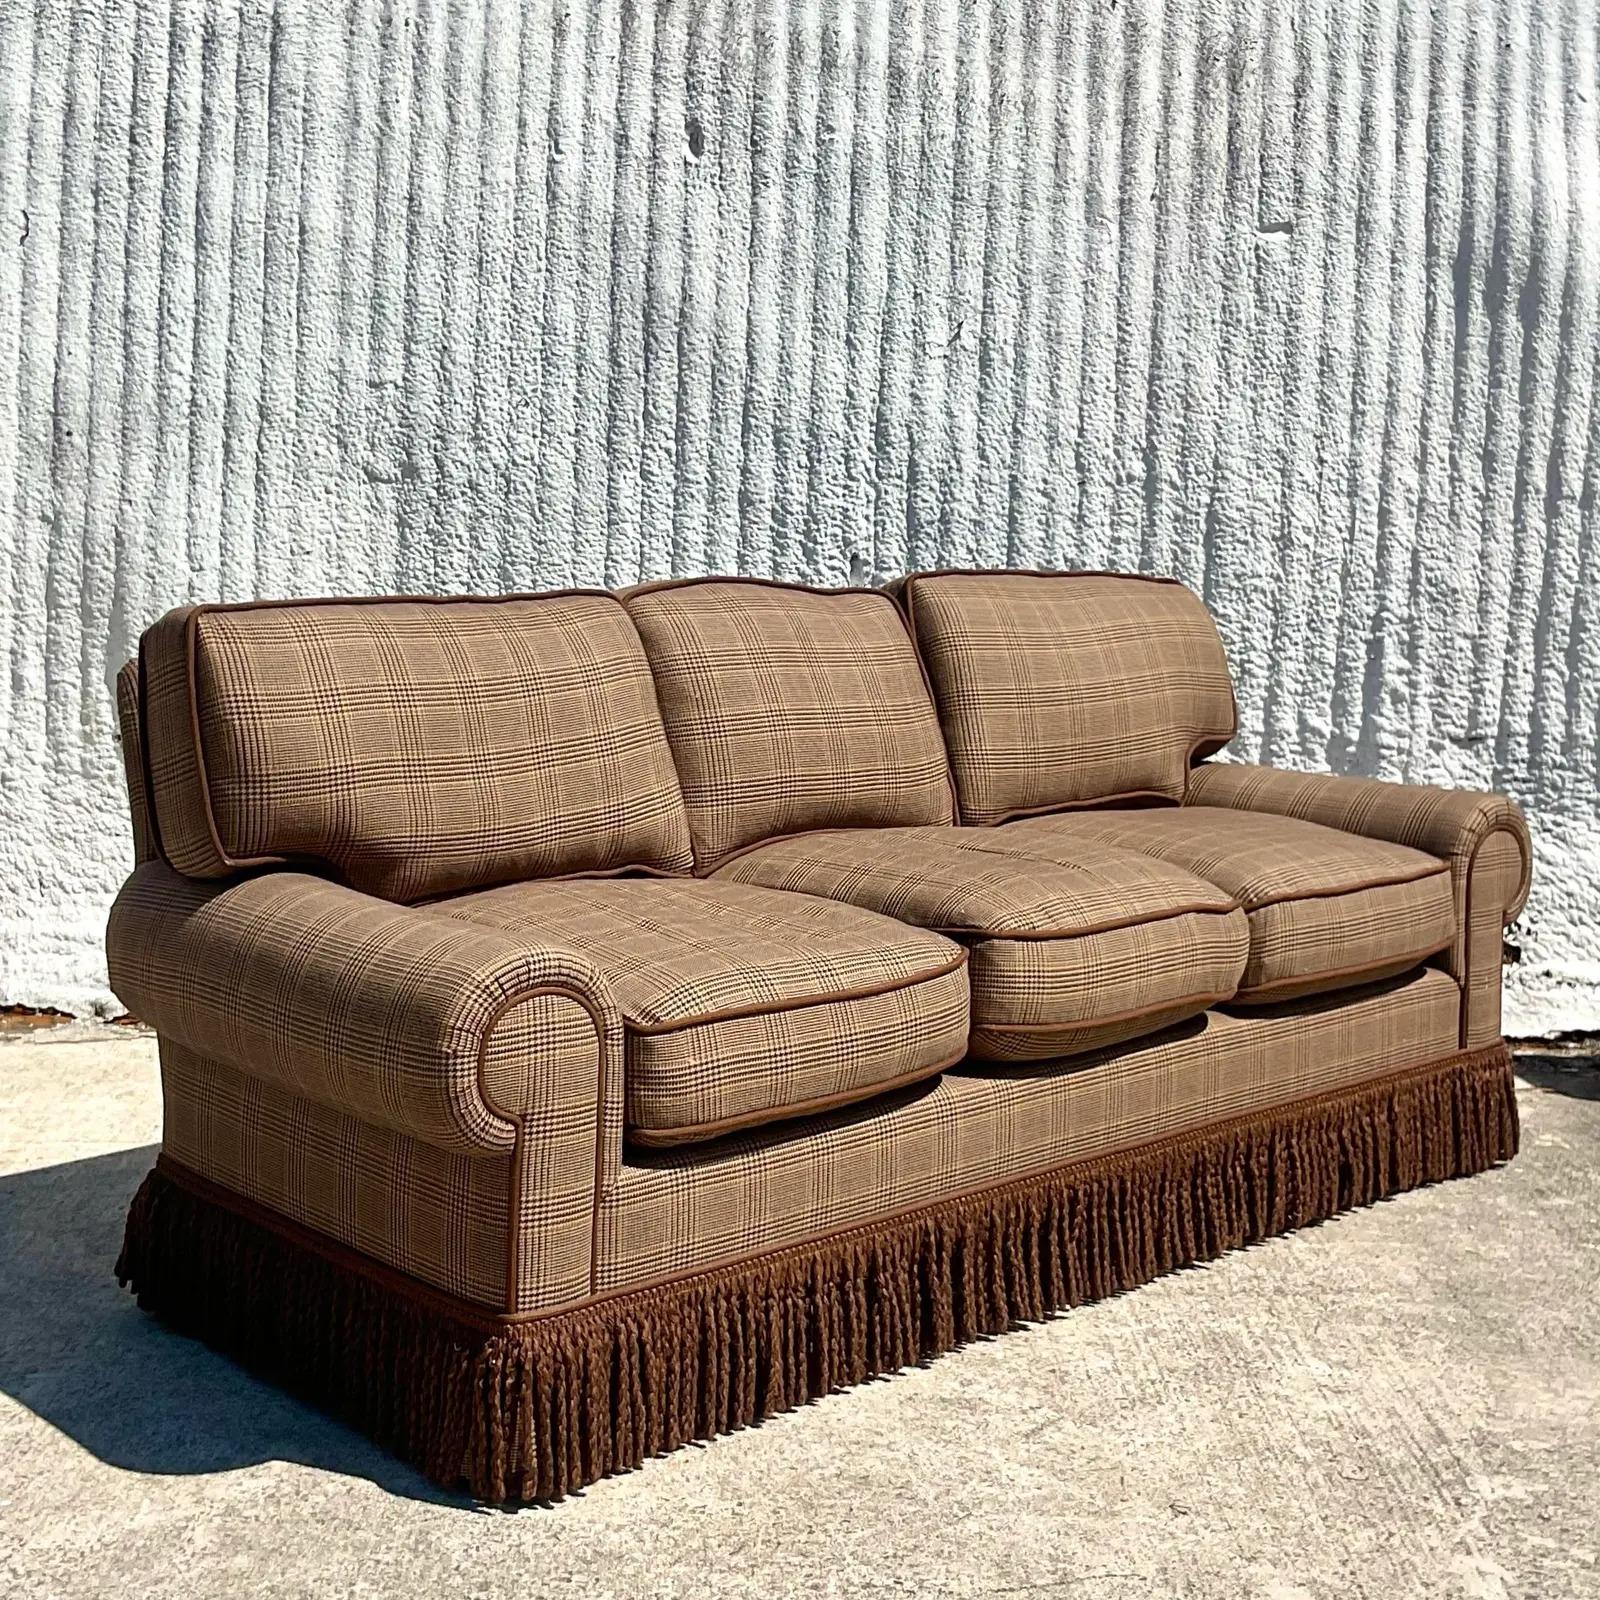 An exceptional vintage custom built sofa. Beautiful wool Glencheck plaid in, rich browns. Totally down filled with gorgeous twisted brown fringe. Perfect in every way. Acquired from a Palm Beach estate.